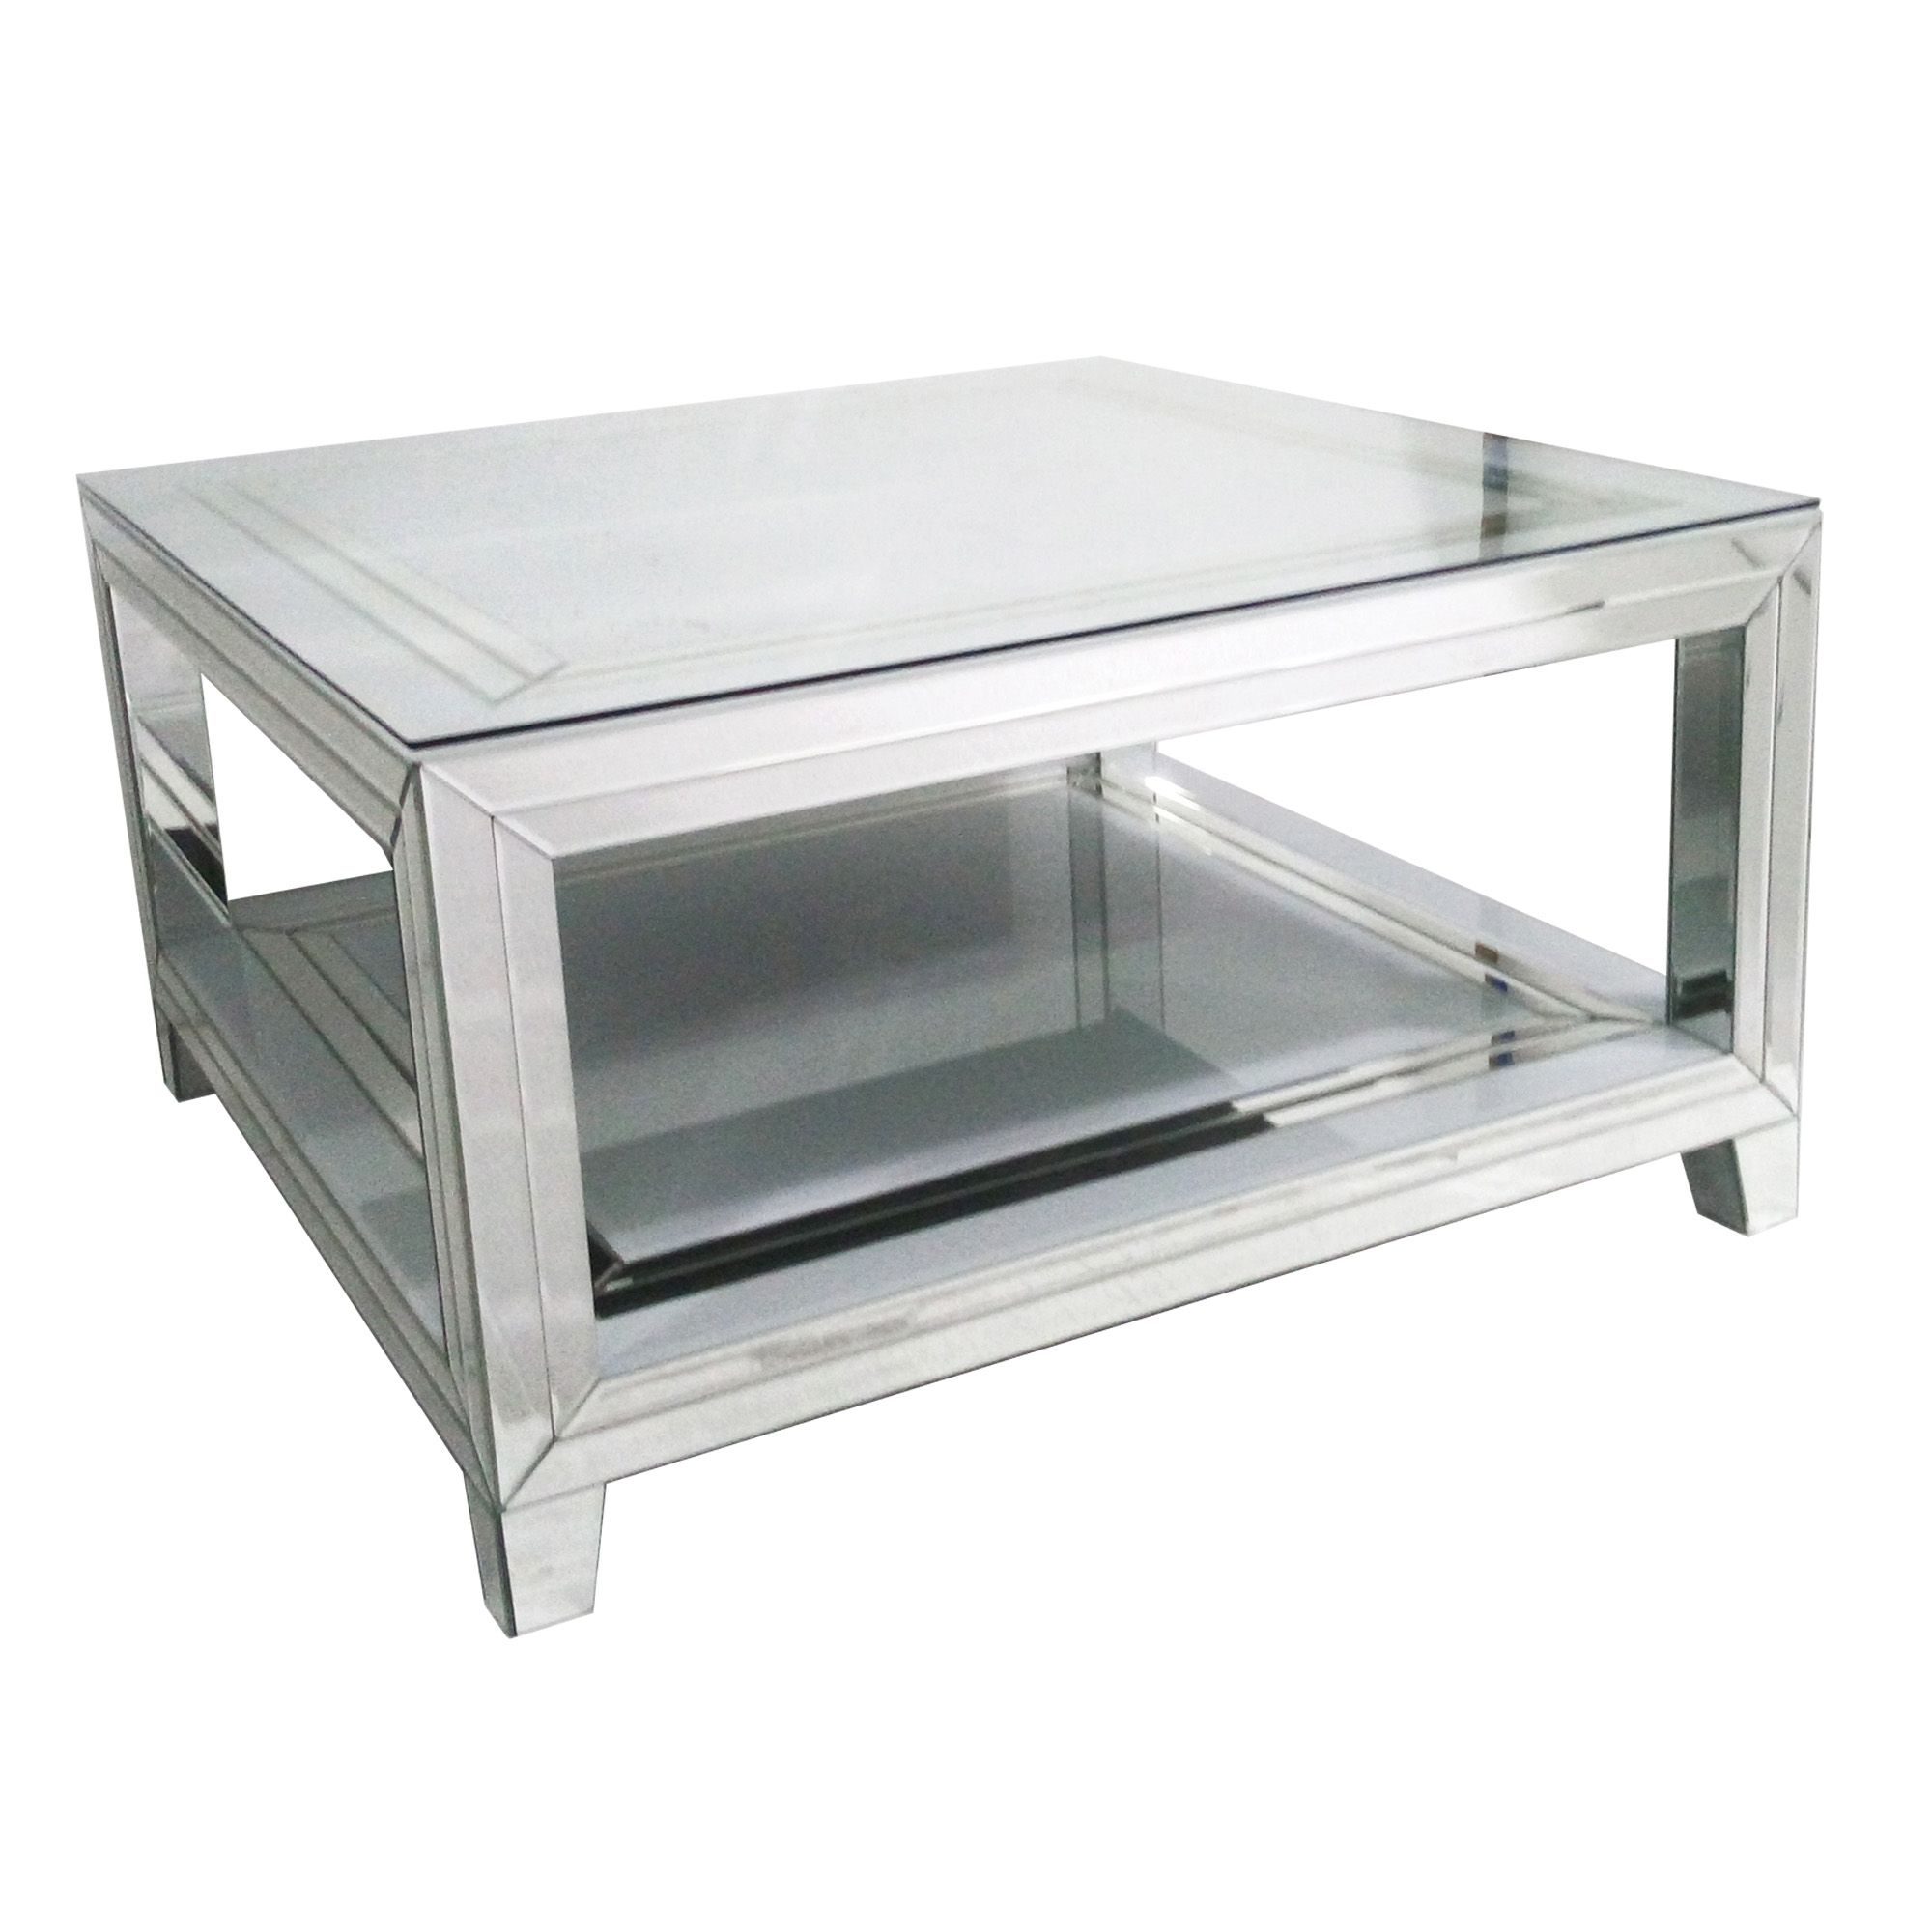 Bianco Mirrored Square Coffee Table | Mirrored Furniture Throughout Mirrored Modern Coffee Tables (View 12 of 15)